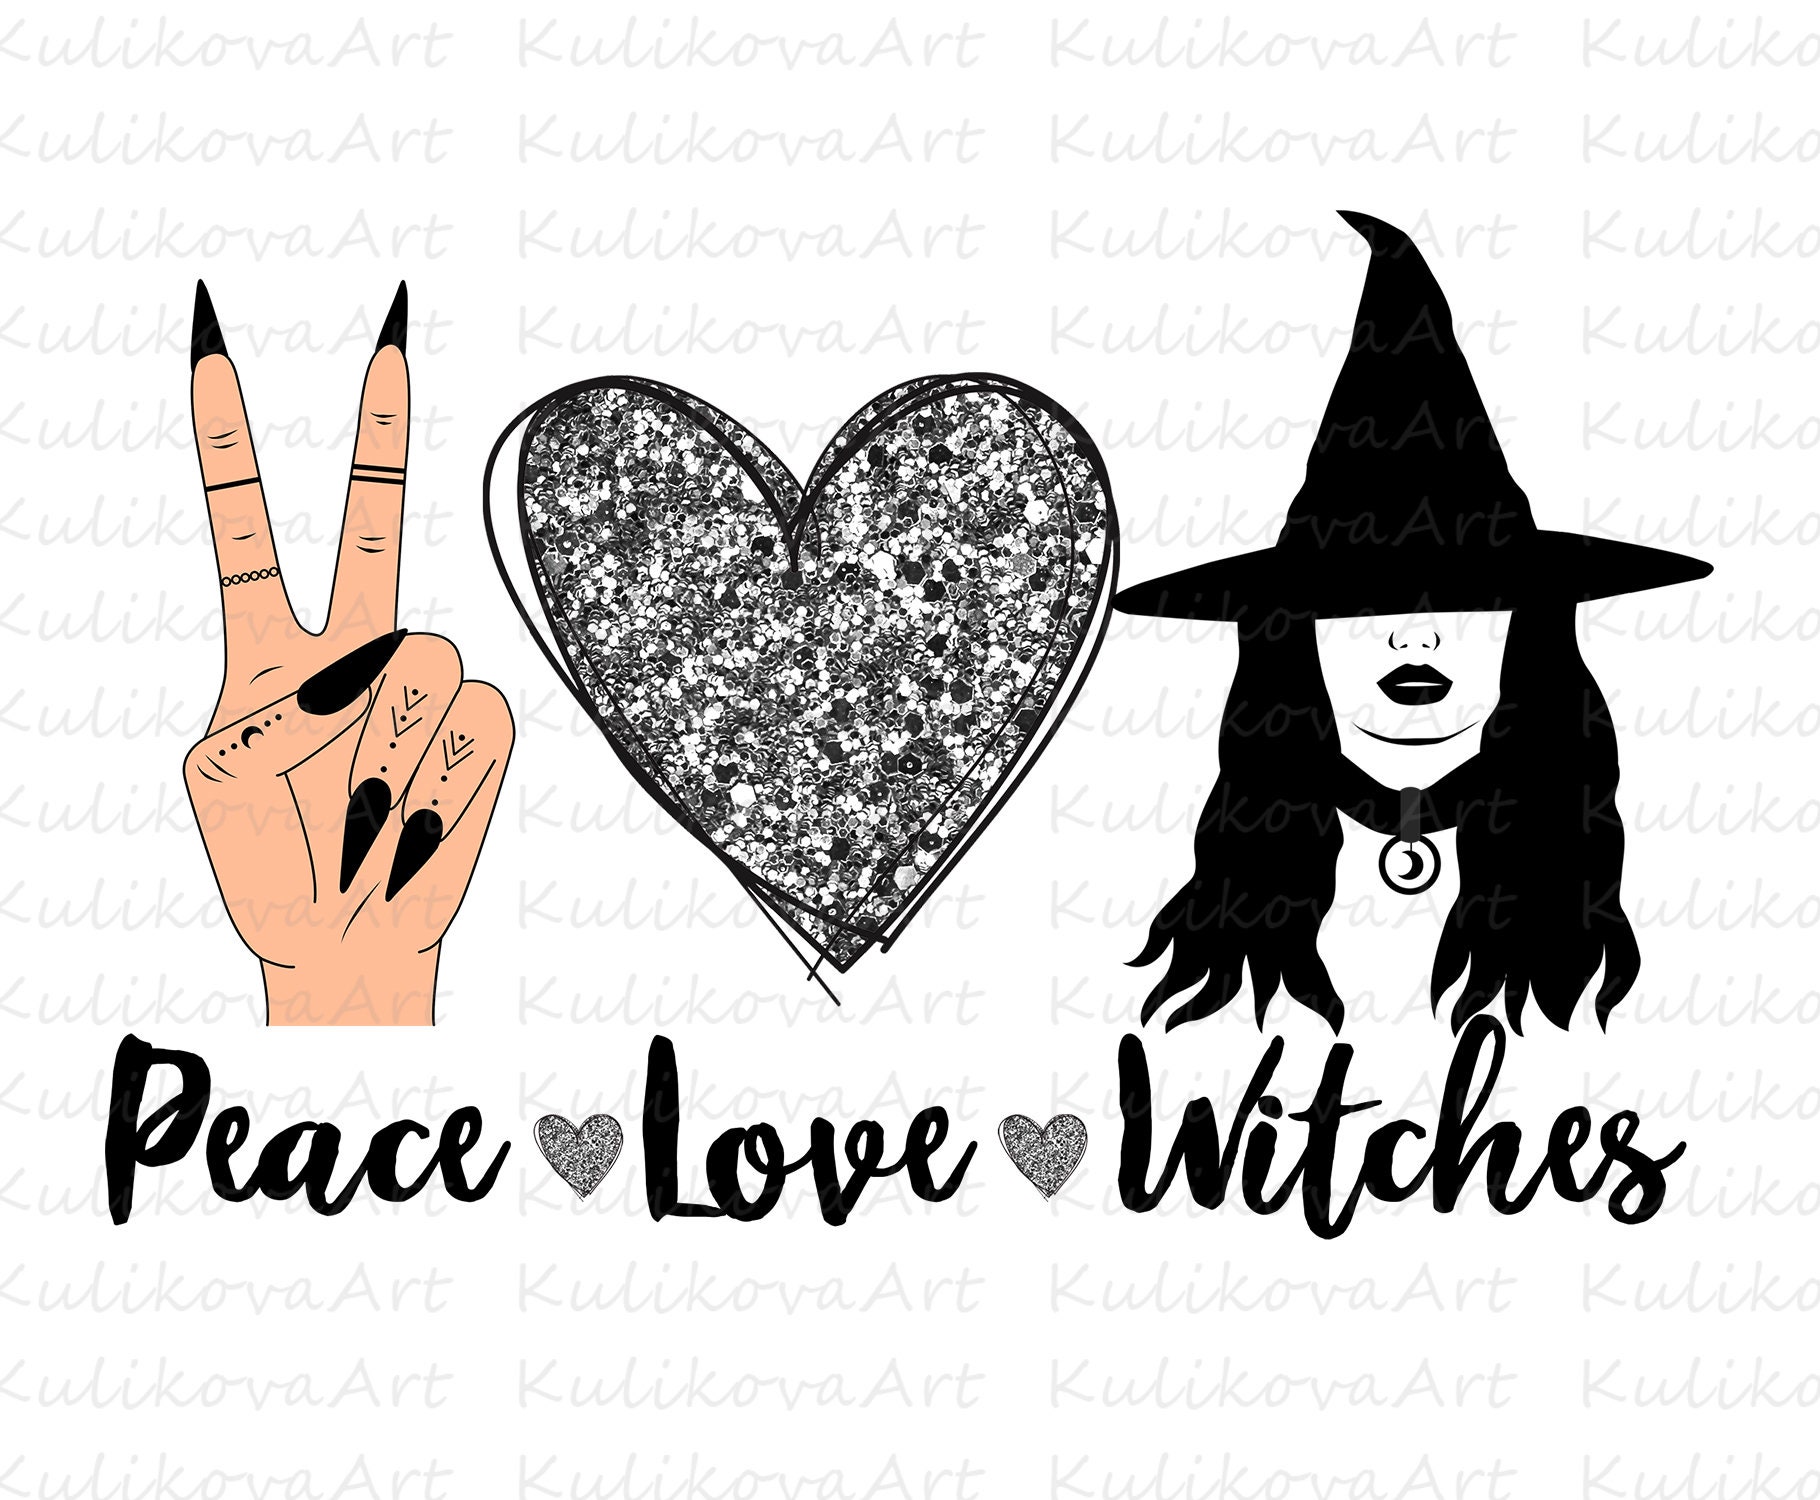 Peace love basic witch sublimation design PNG download Peace love witches sublimation download Peace love halloween Peace love witch png